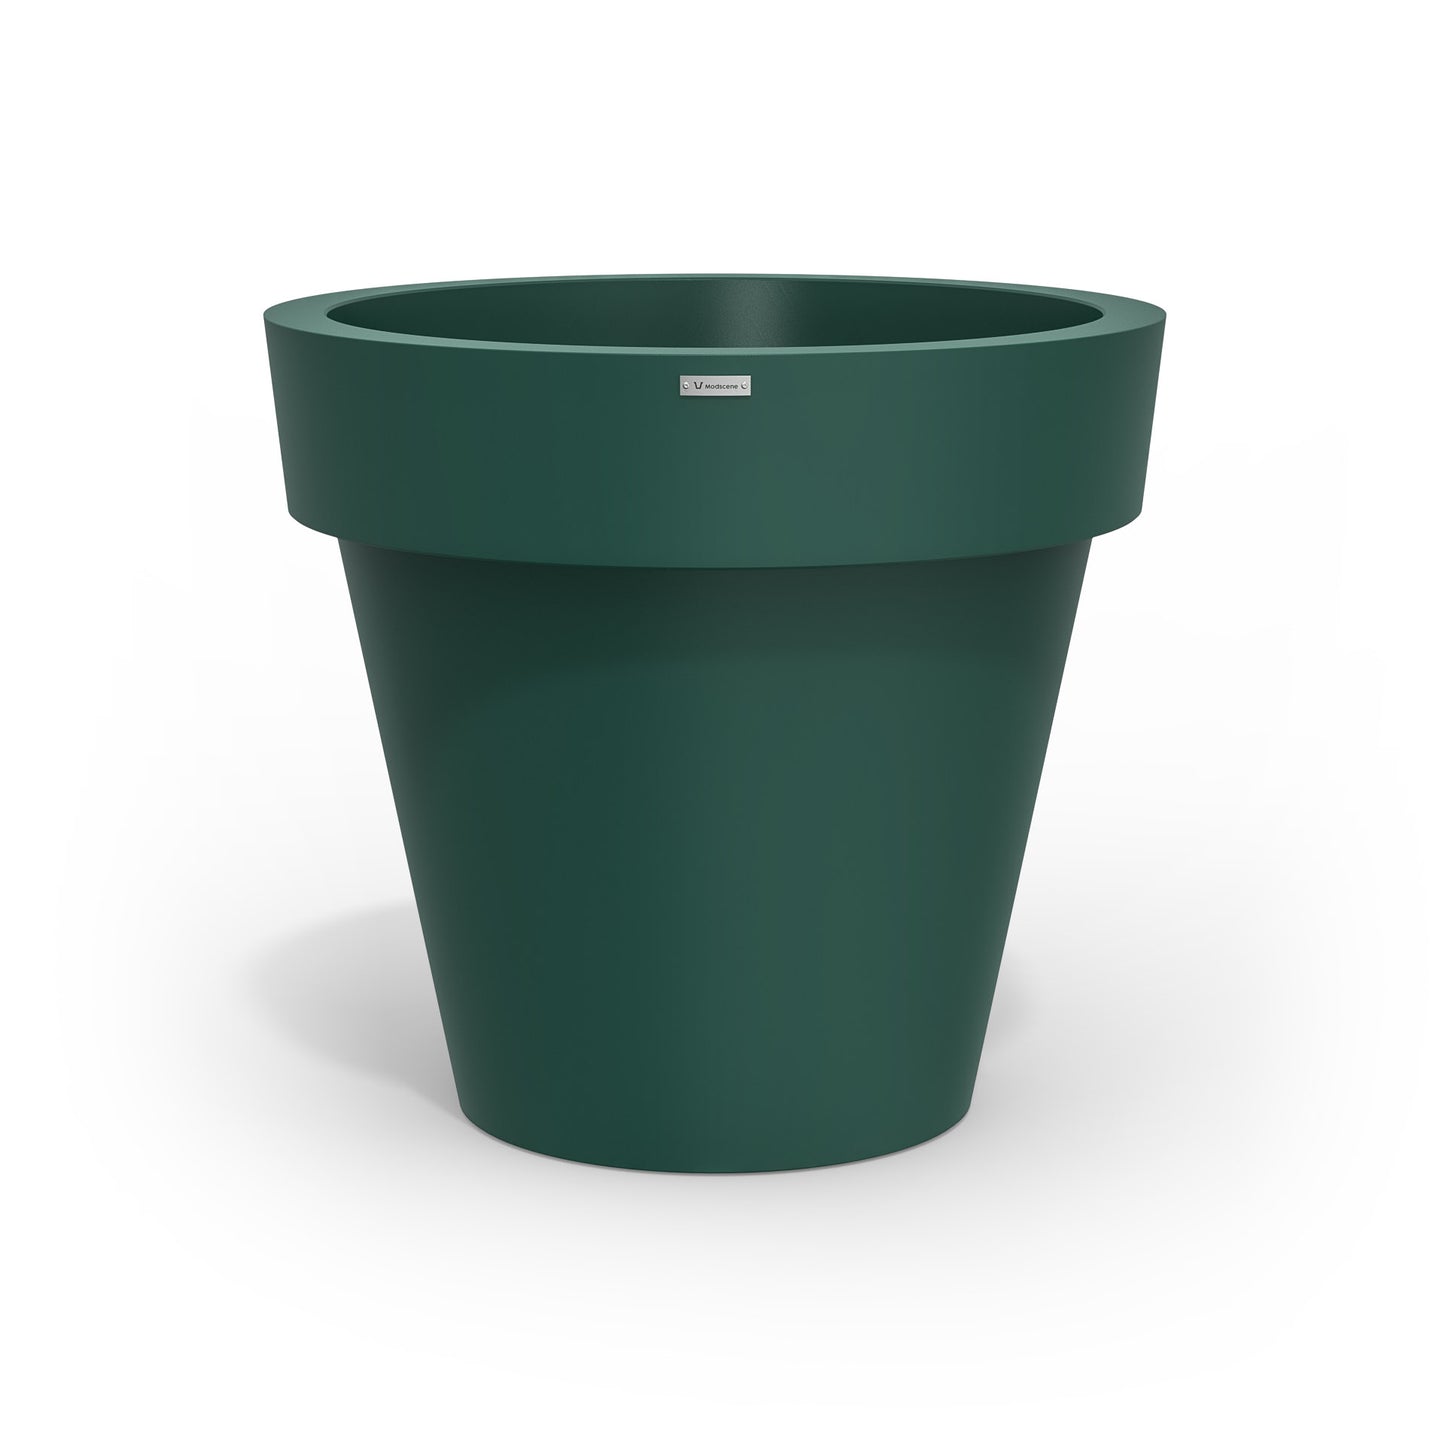 Large Modscene plastic planter pot in a emerald green colour. New Zealand made.